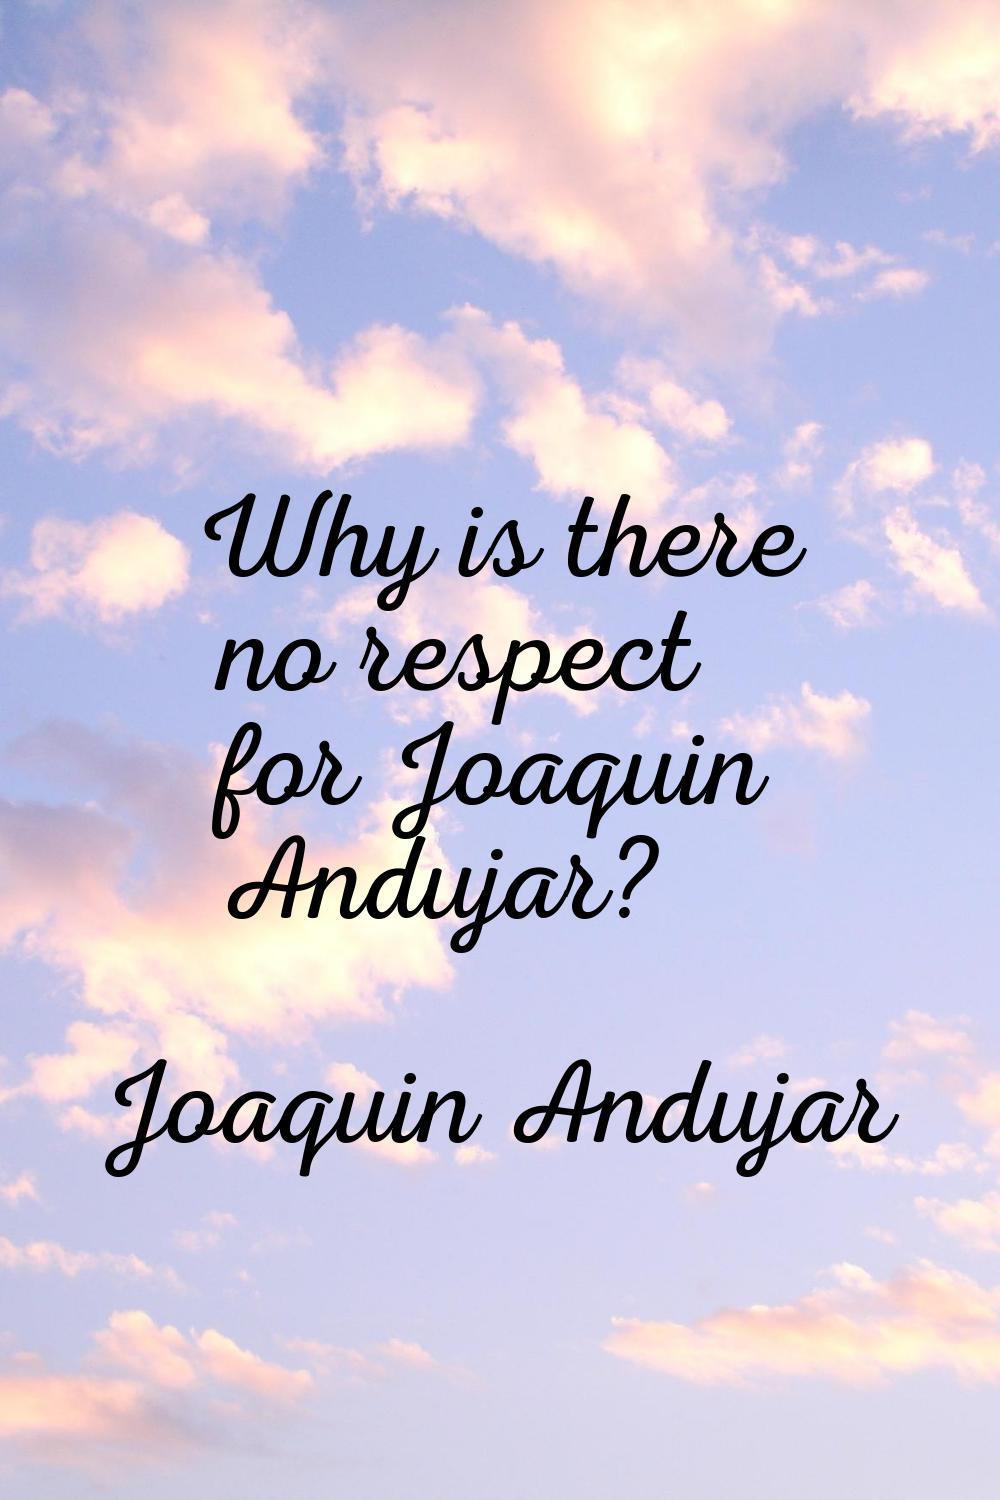 Why is there no respect for Joaquin Andujar?